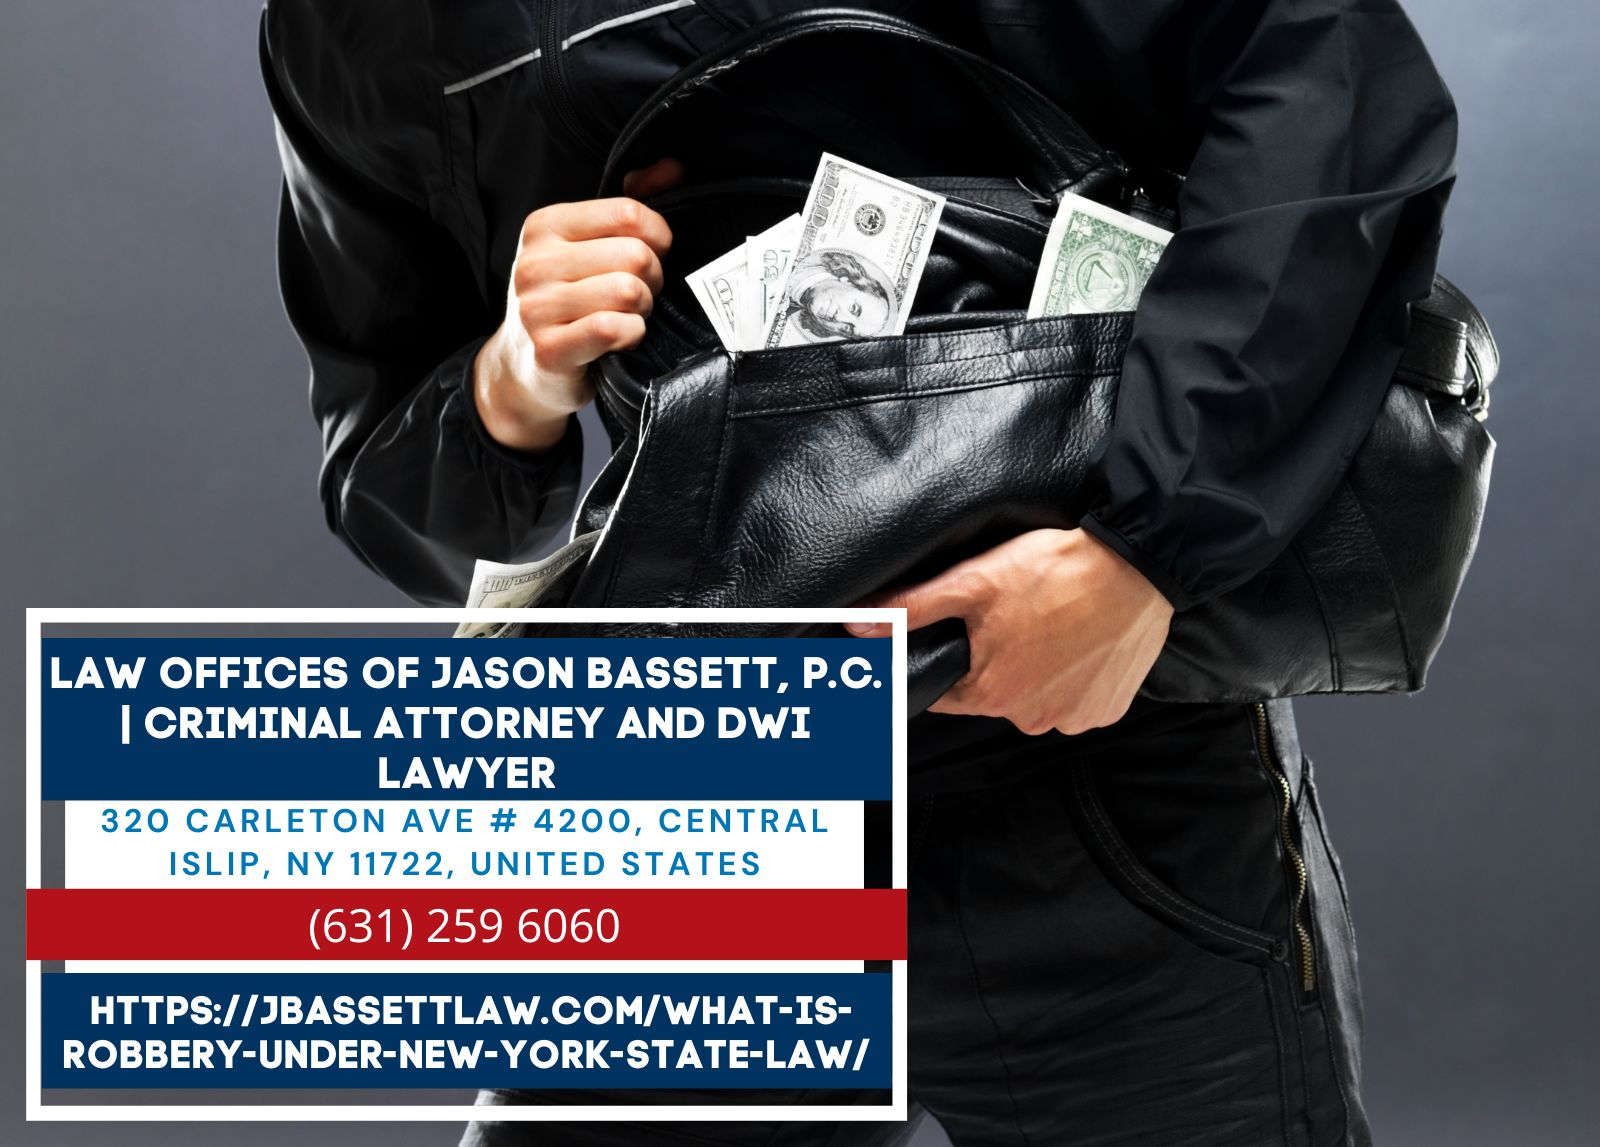 Long Island Robbery Lawyer Jason Bassett Releases Comprehensive Article Explaining Robbery Laws in New York State